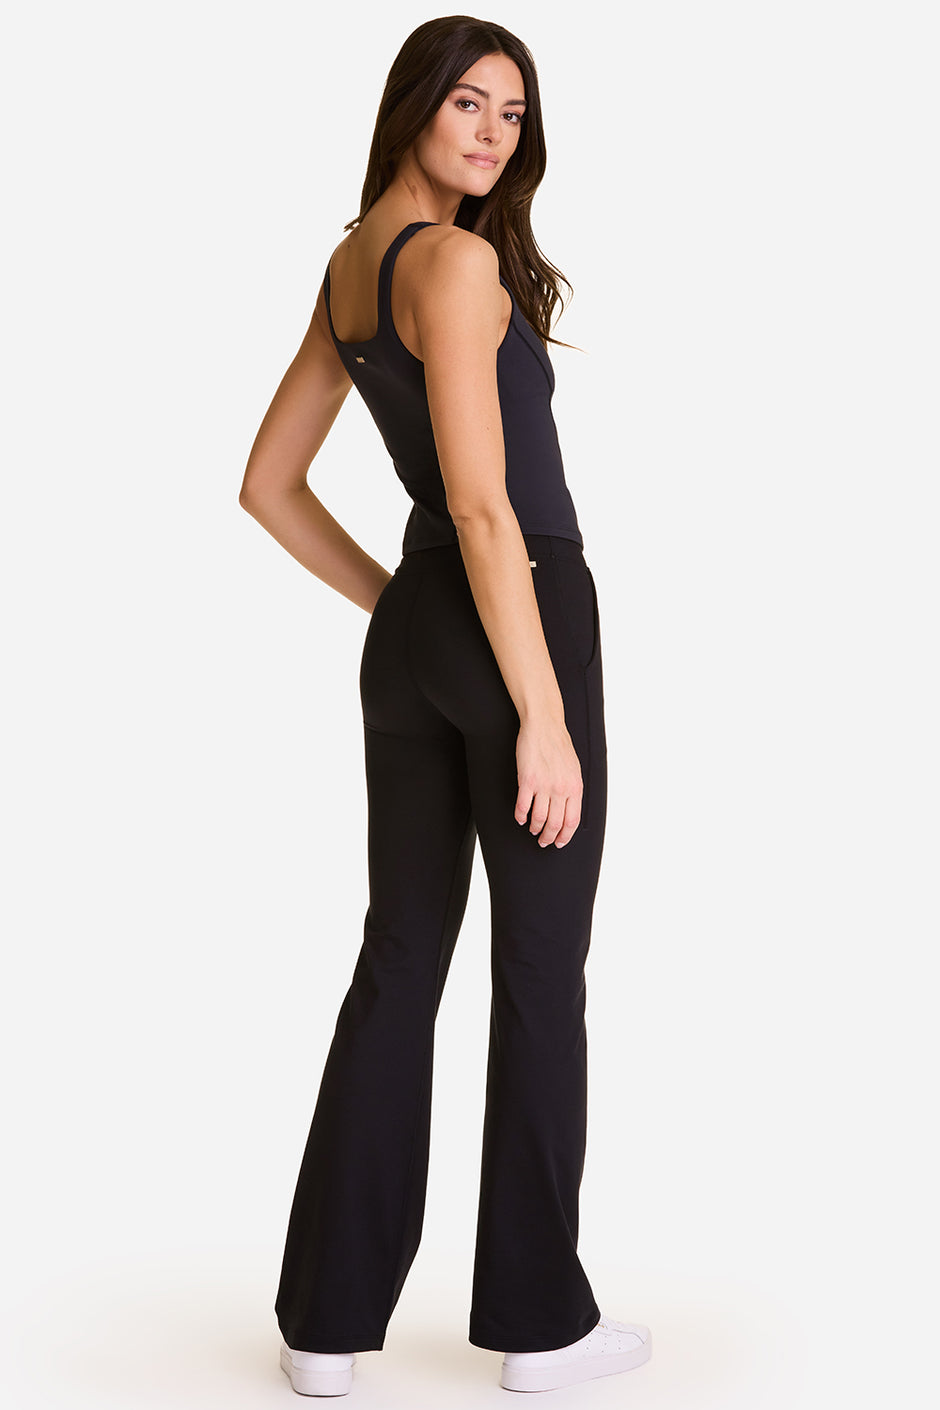 Best Sellers - Athleisure Wear and Yoga Clothes | Alala